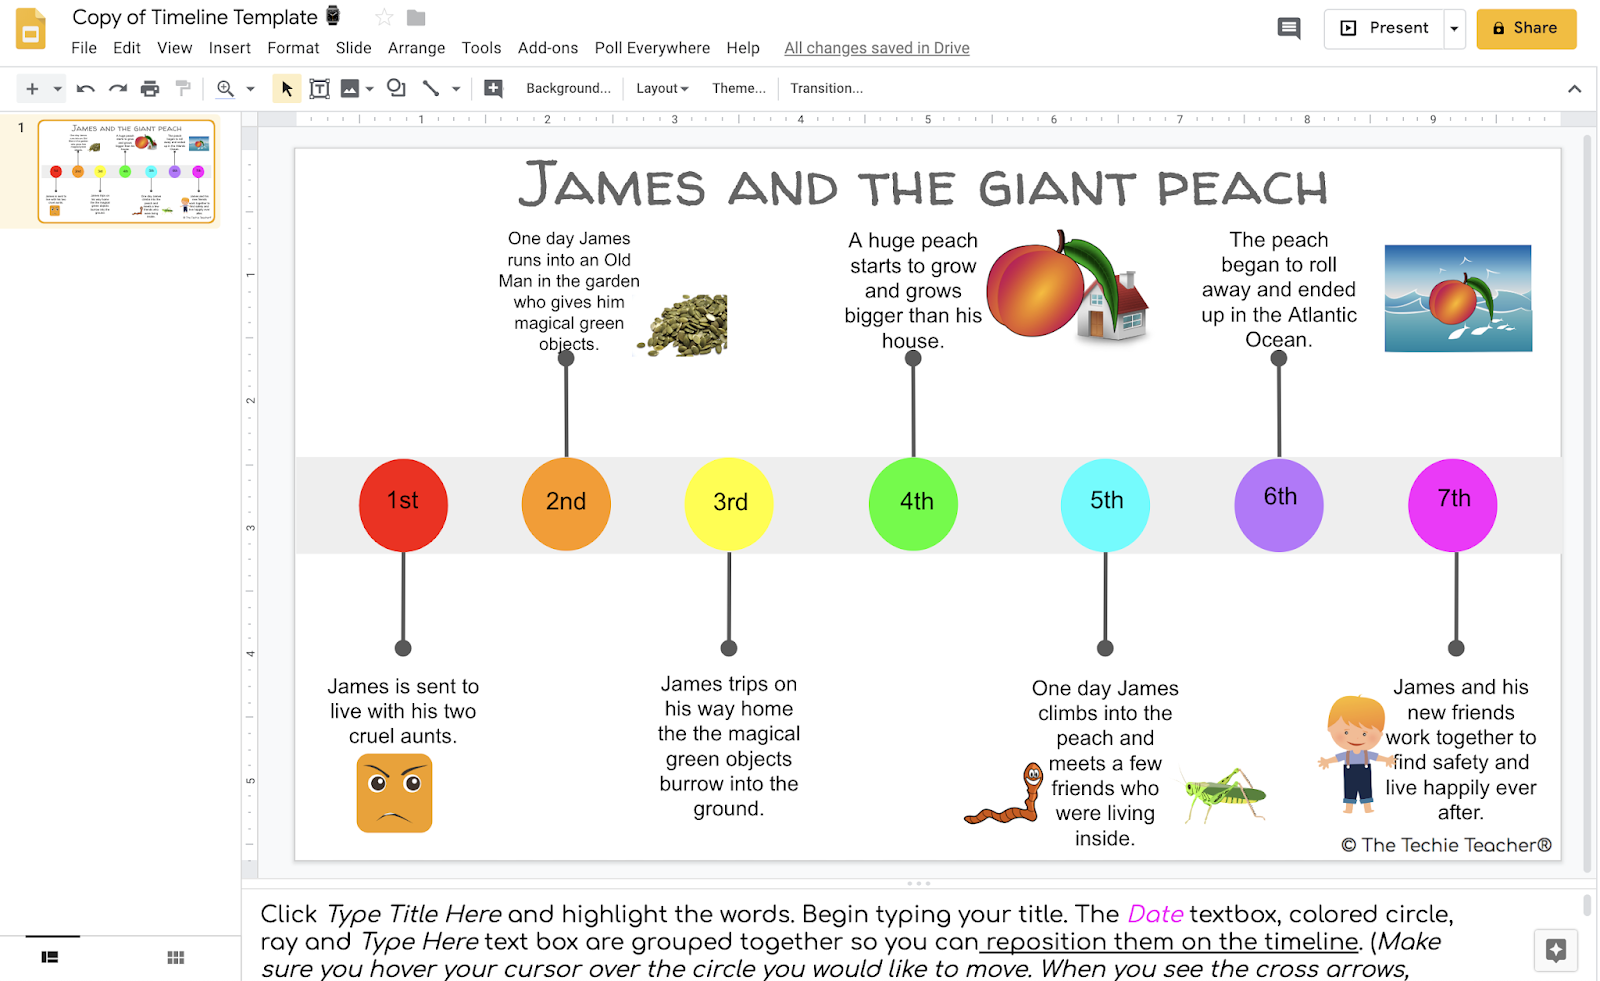 Create a Timeline Retelling the Important Events of a Story Using this FREE digital timelines template in Google Slides